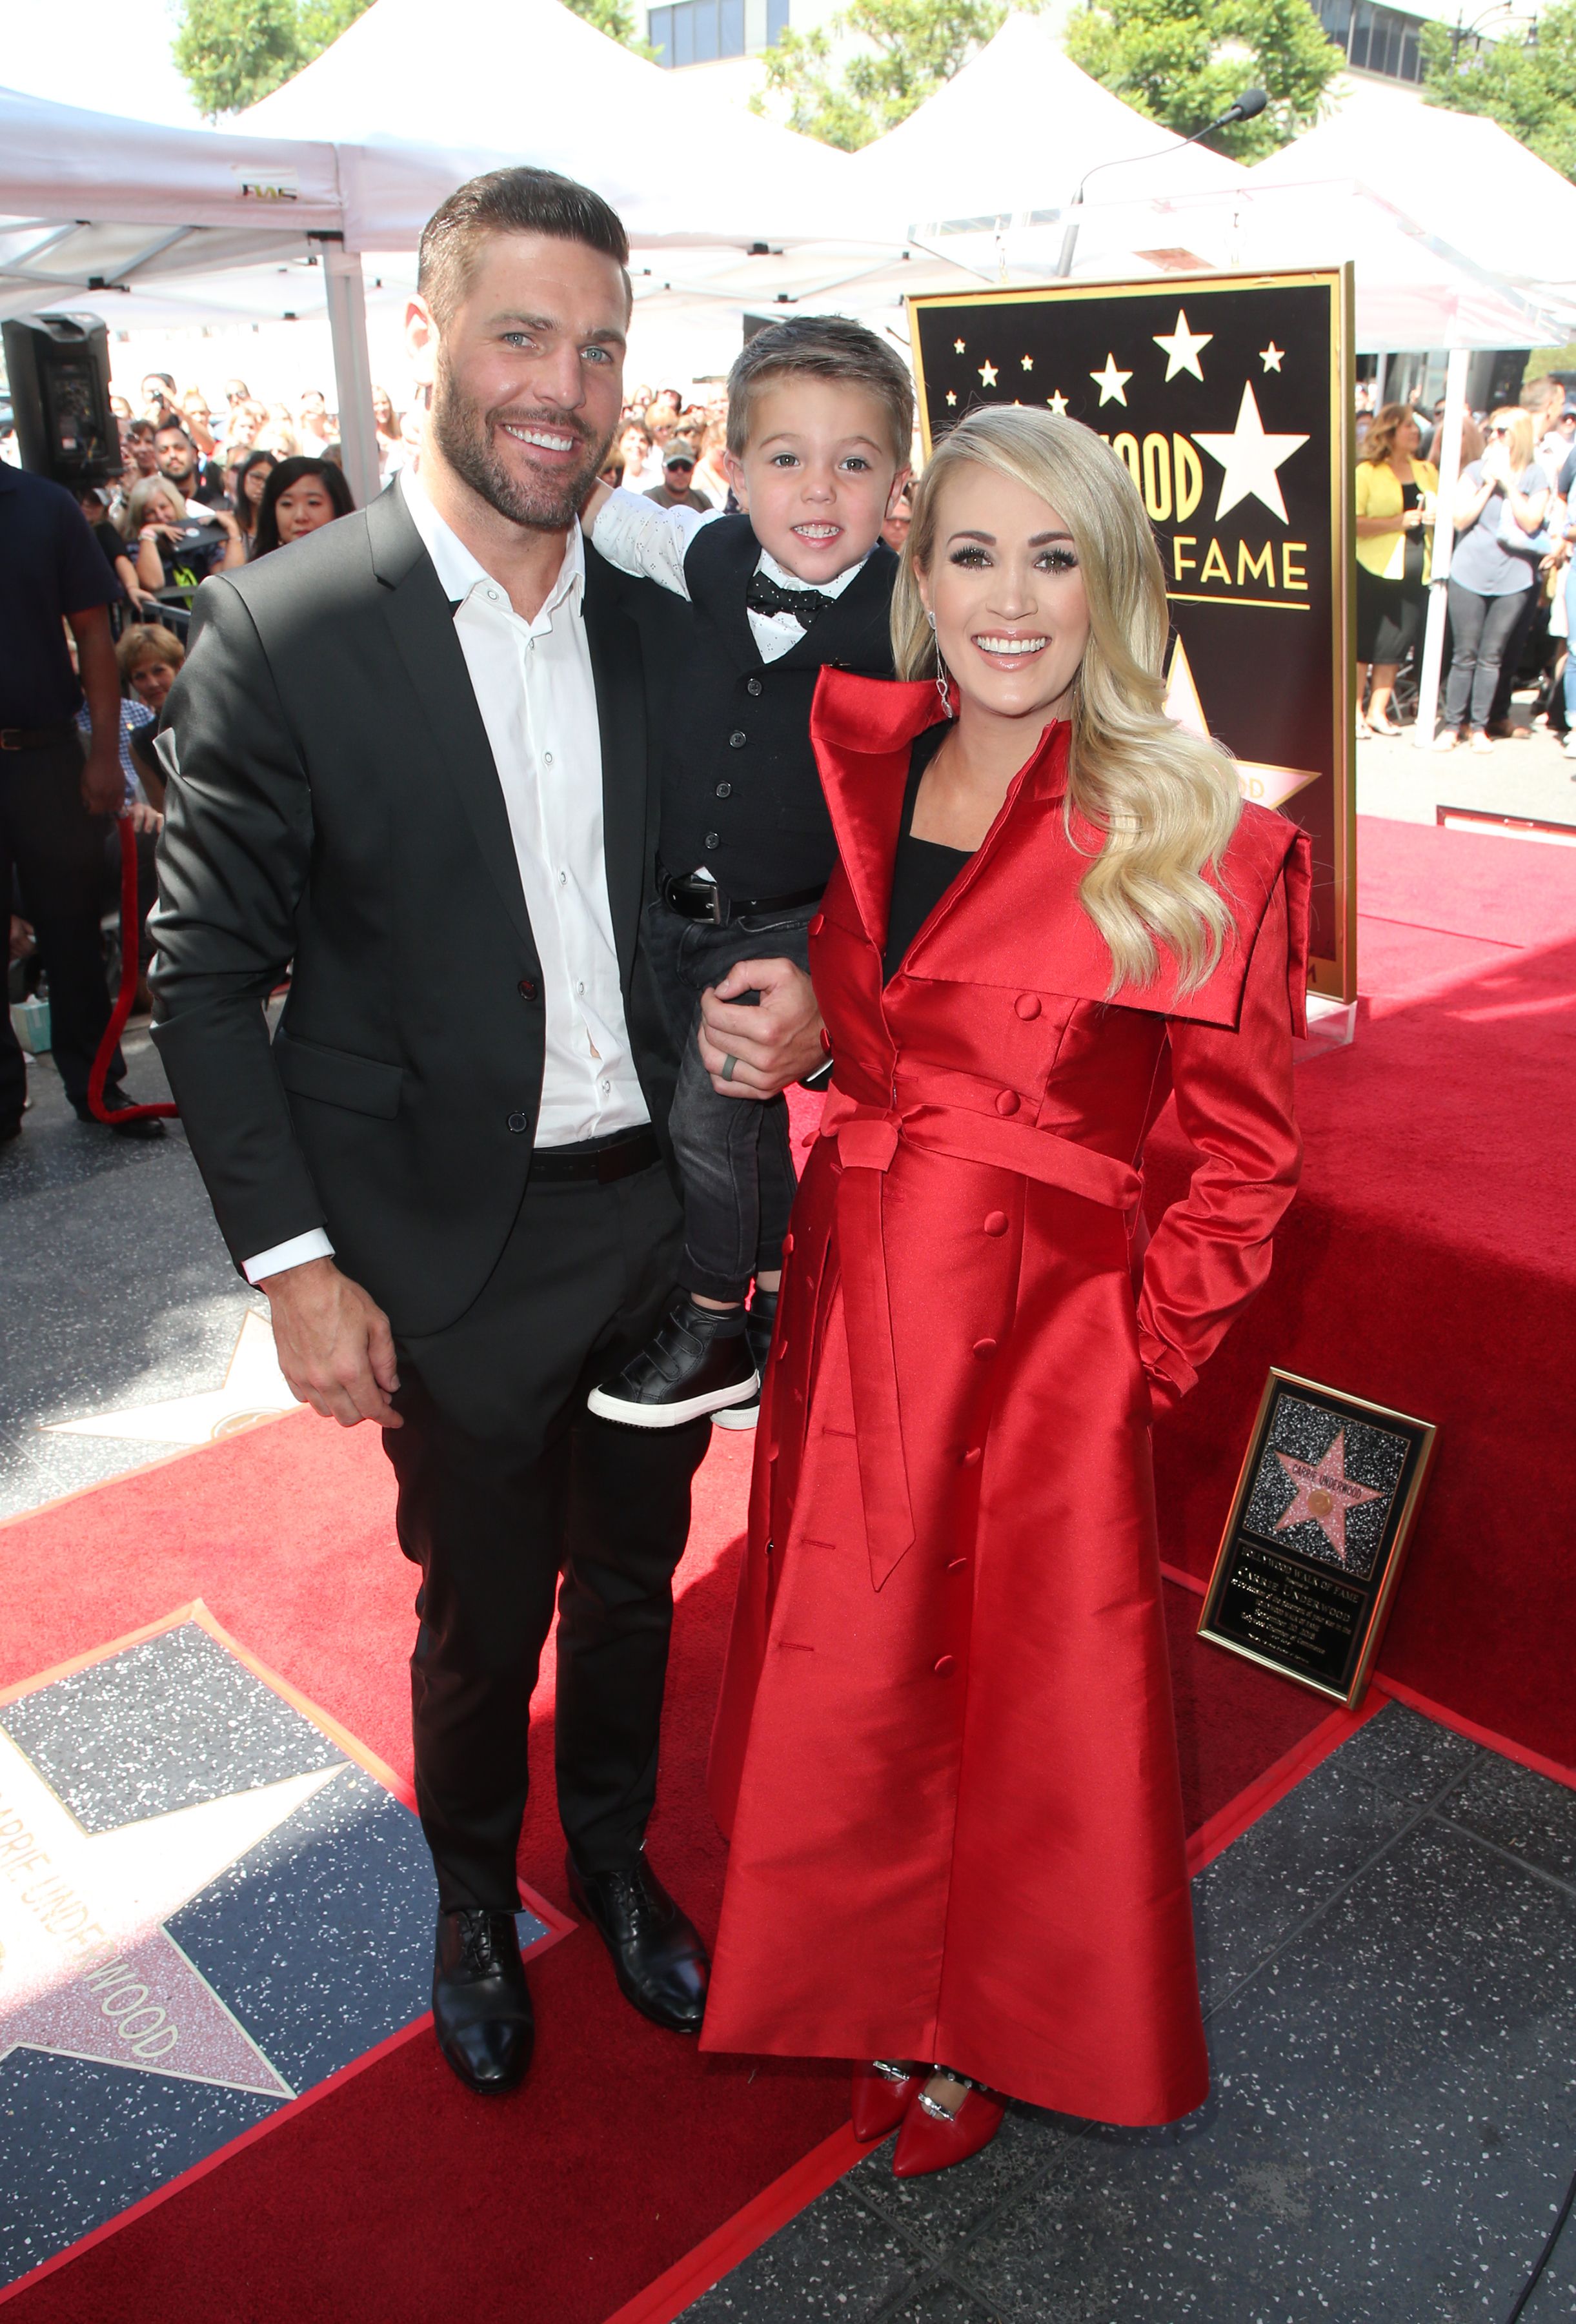 Carrie Underwood's 2 Kids: Everything to Know